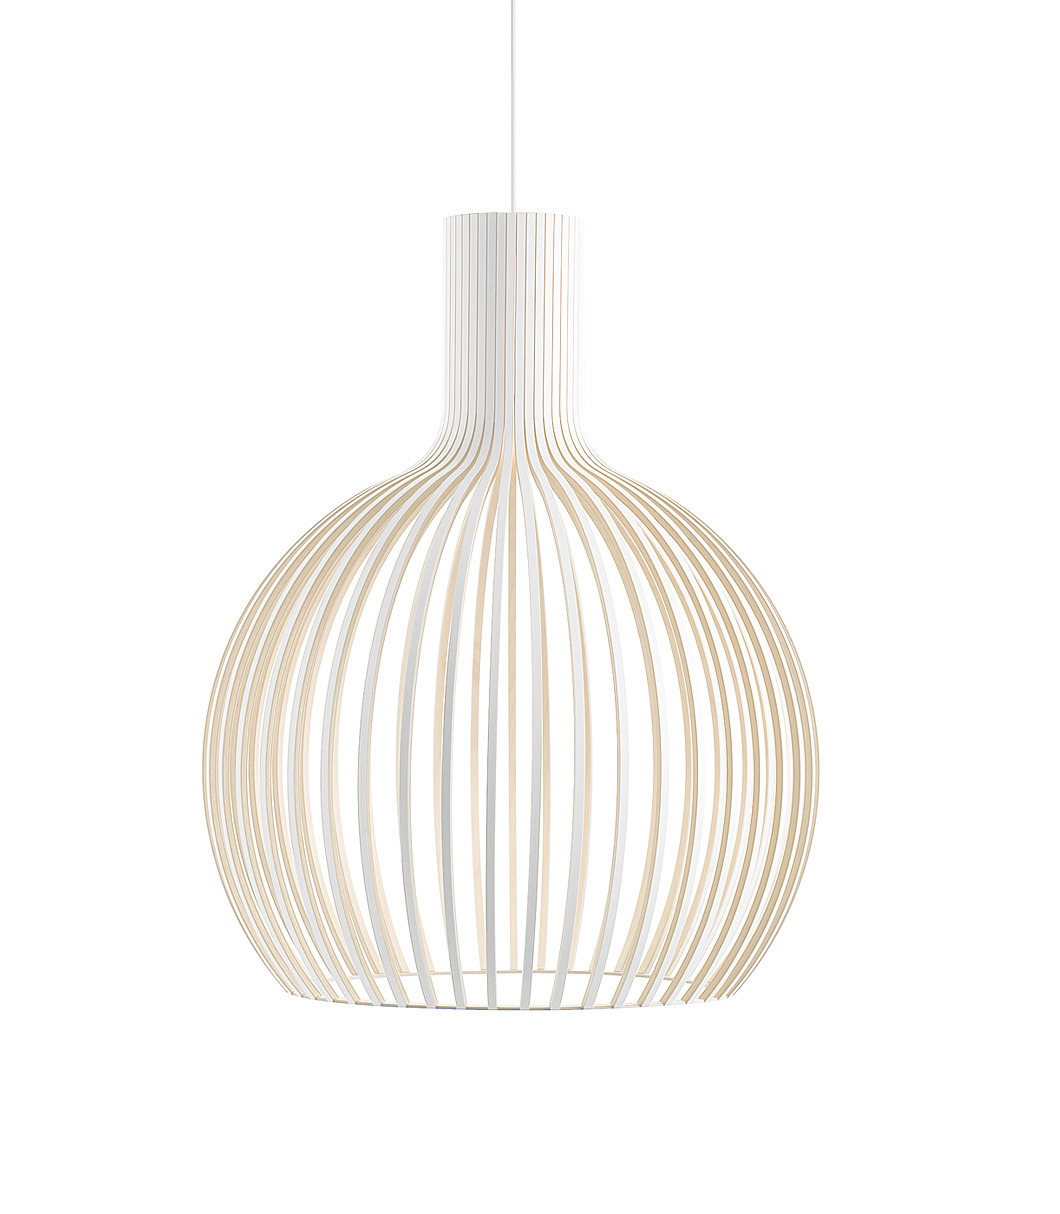 Octo 4240 pendant lamp is available in white laminated